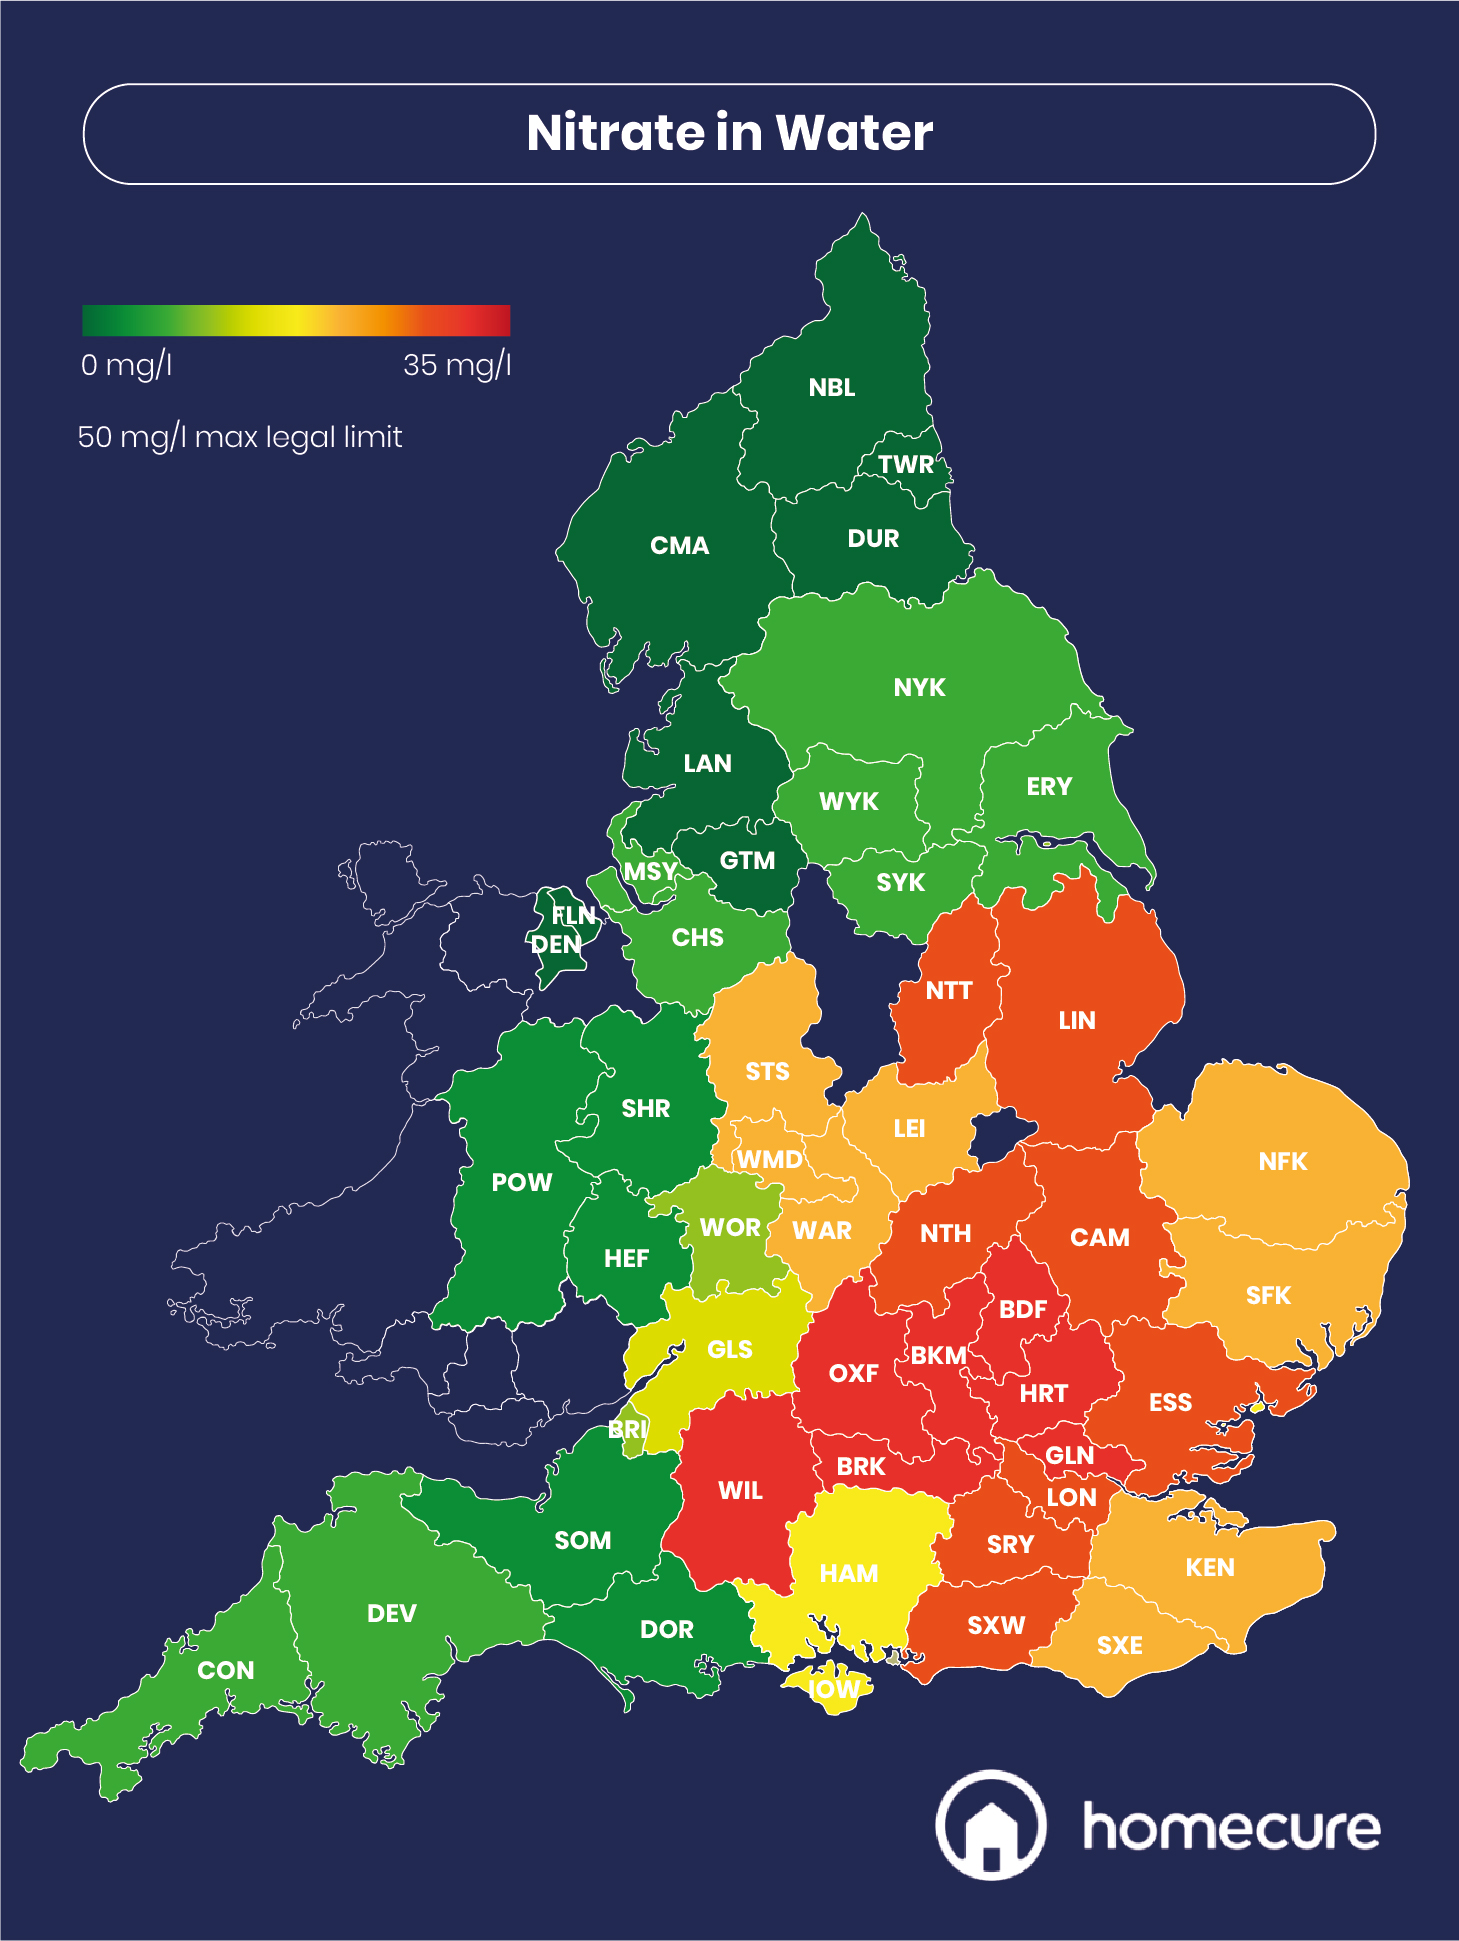 Counties in the UK with the highest levels of nitrates in water test samples